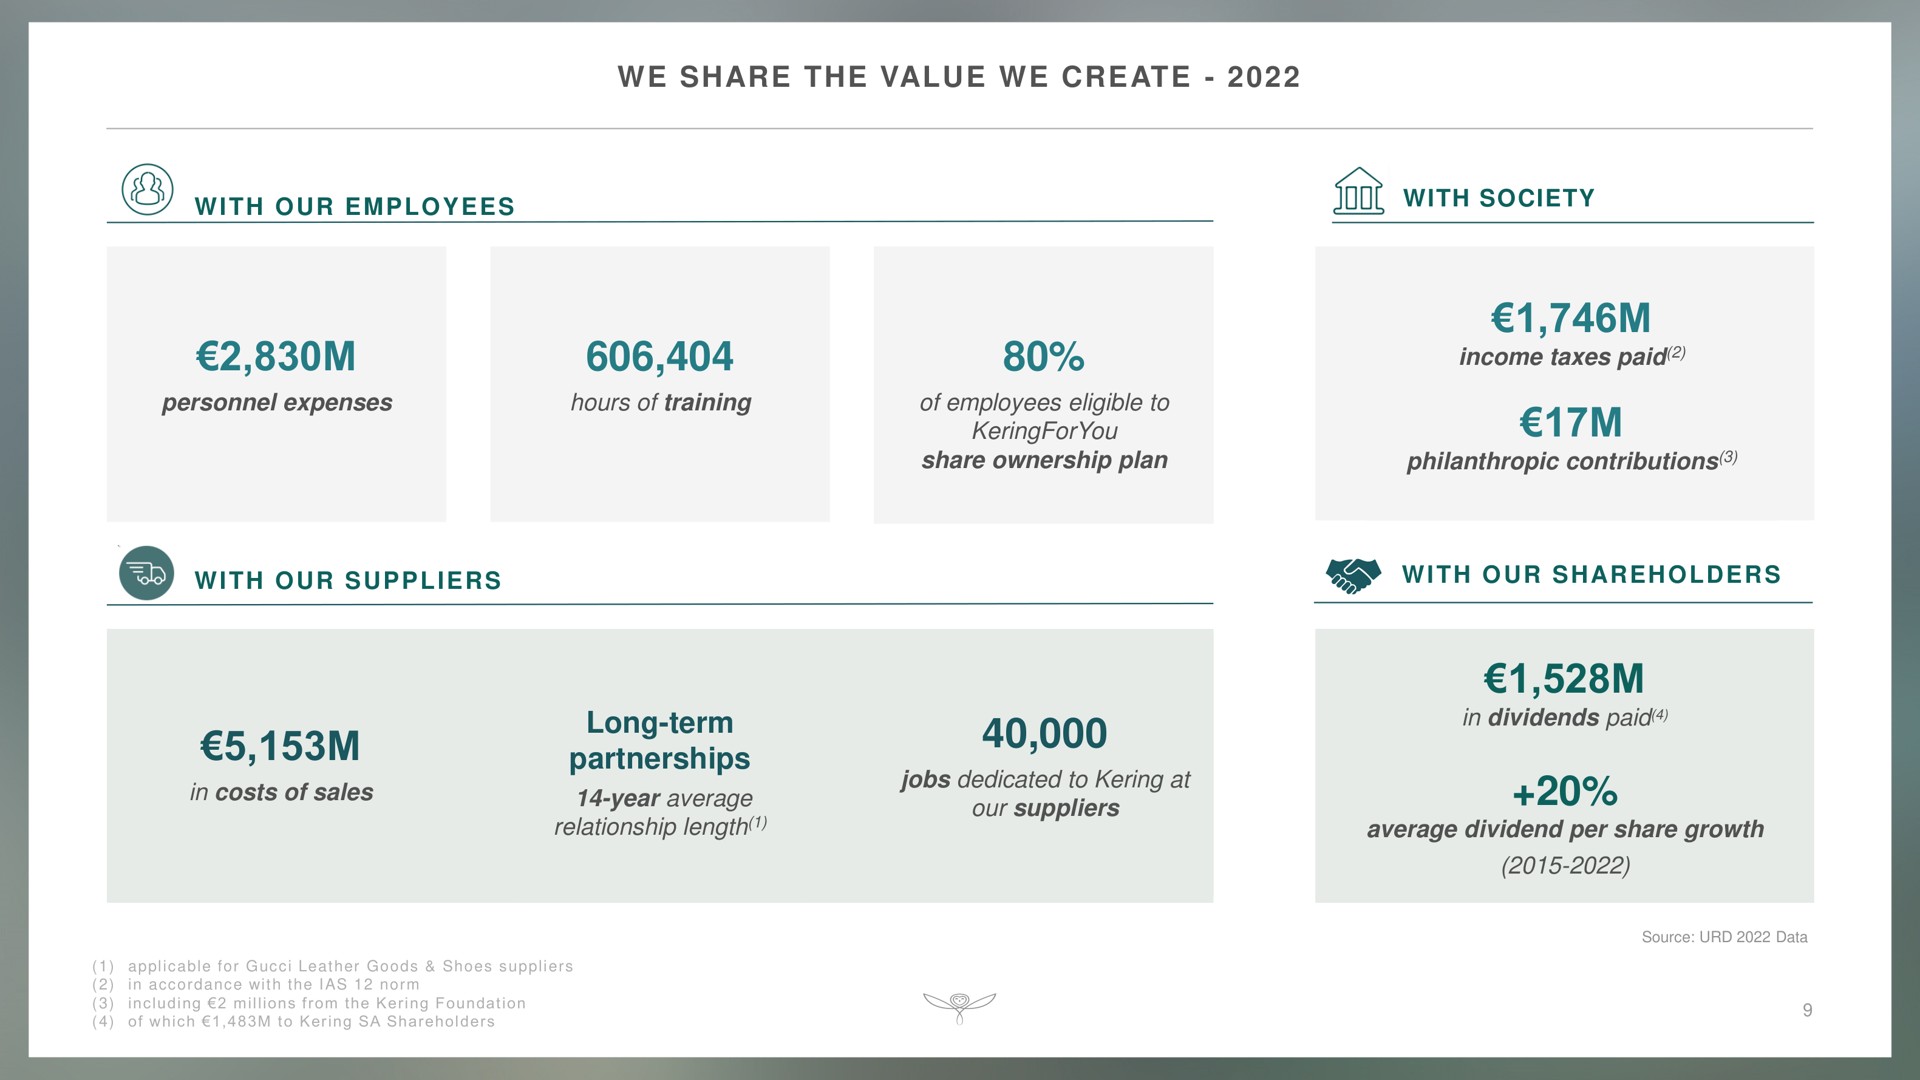 we share the value we create i with society personnel expenses hours of training of employees eligible to share ownership plan income taxes paid philanthropic contributions i i i in costs of sales long term partnerships year average relationship length jobs dedicated to at our suppliers in dividends paid average dividend per share growth shareholders | Kering